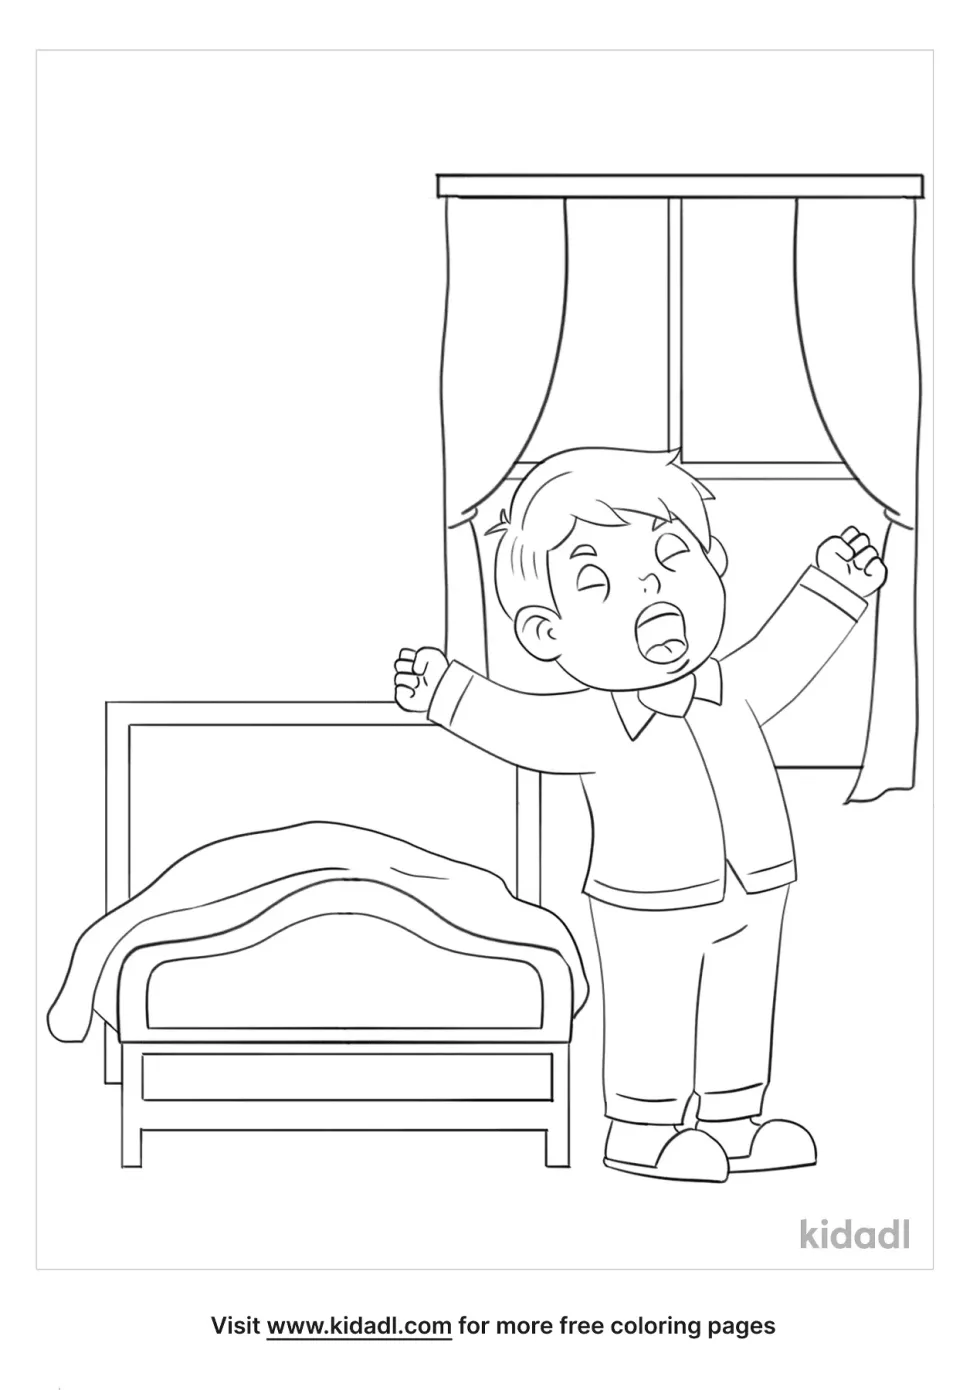 Getting Out Of Bed Coloring Page